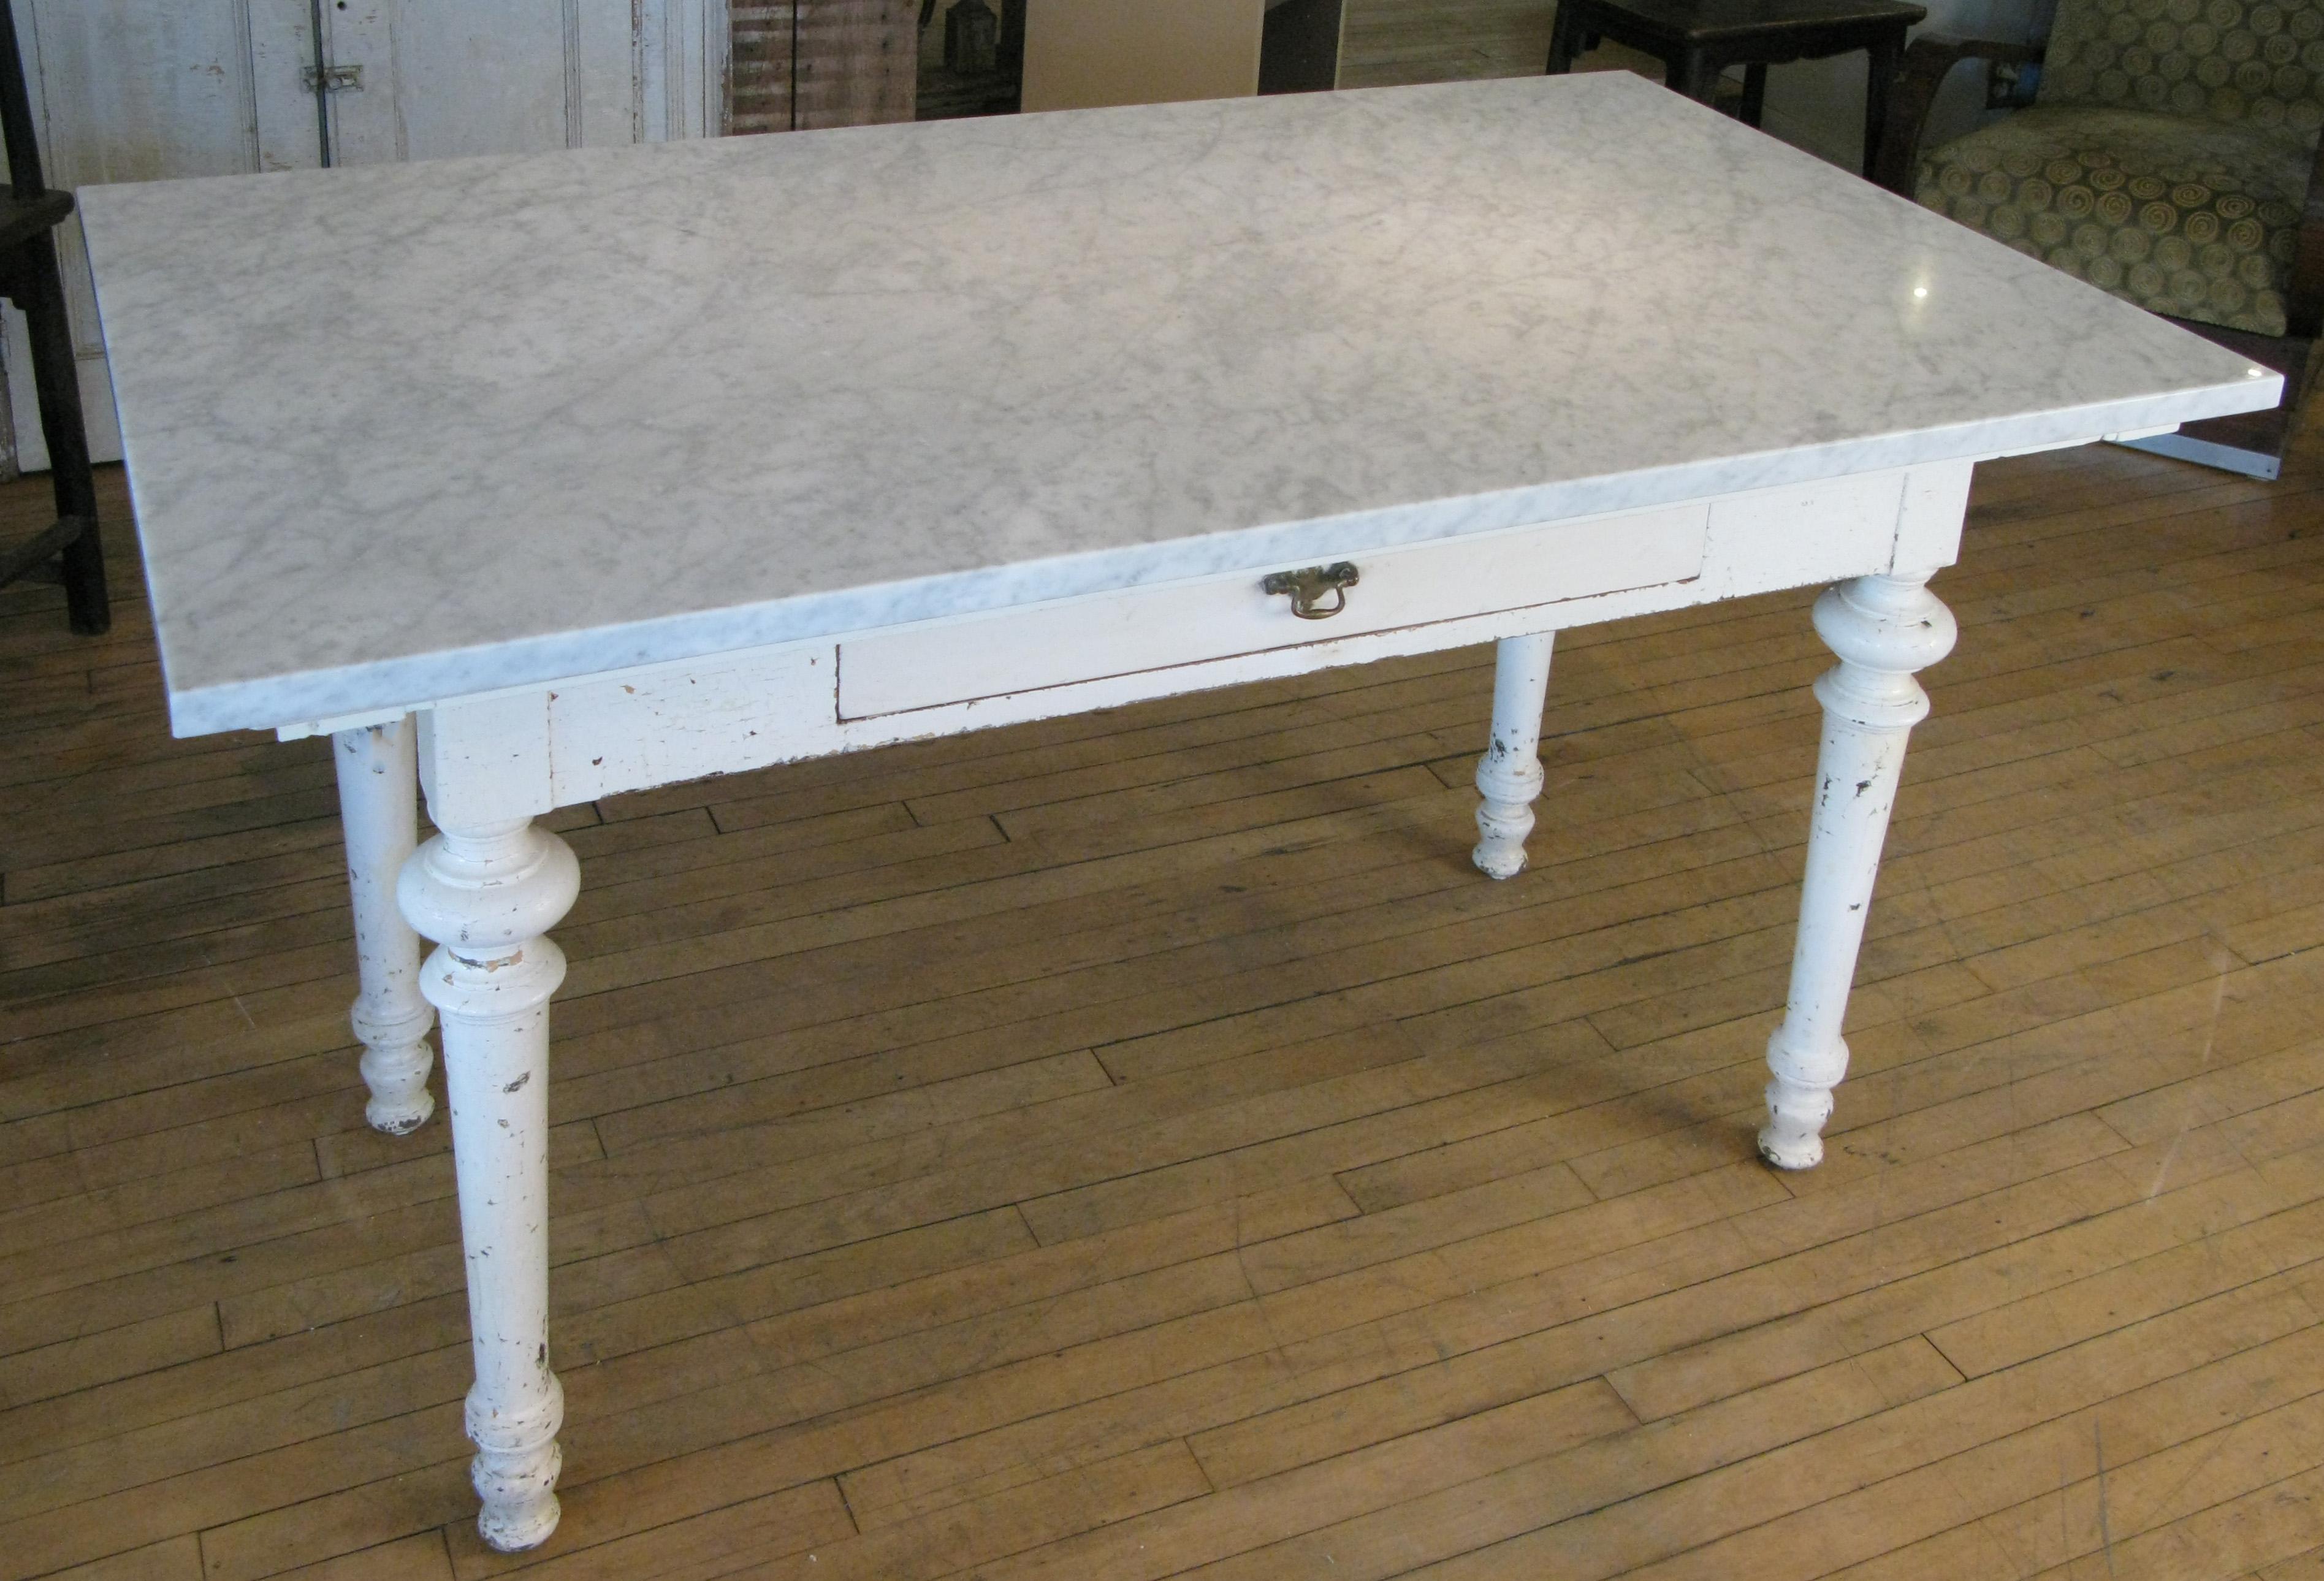 A gorgeous late 19th century painted refectory table with a beautiful Italian Venatino marble top. The table with a single drawer and turned legs, with its original off white painted finish. Fantastic scale and details.